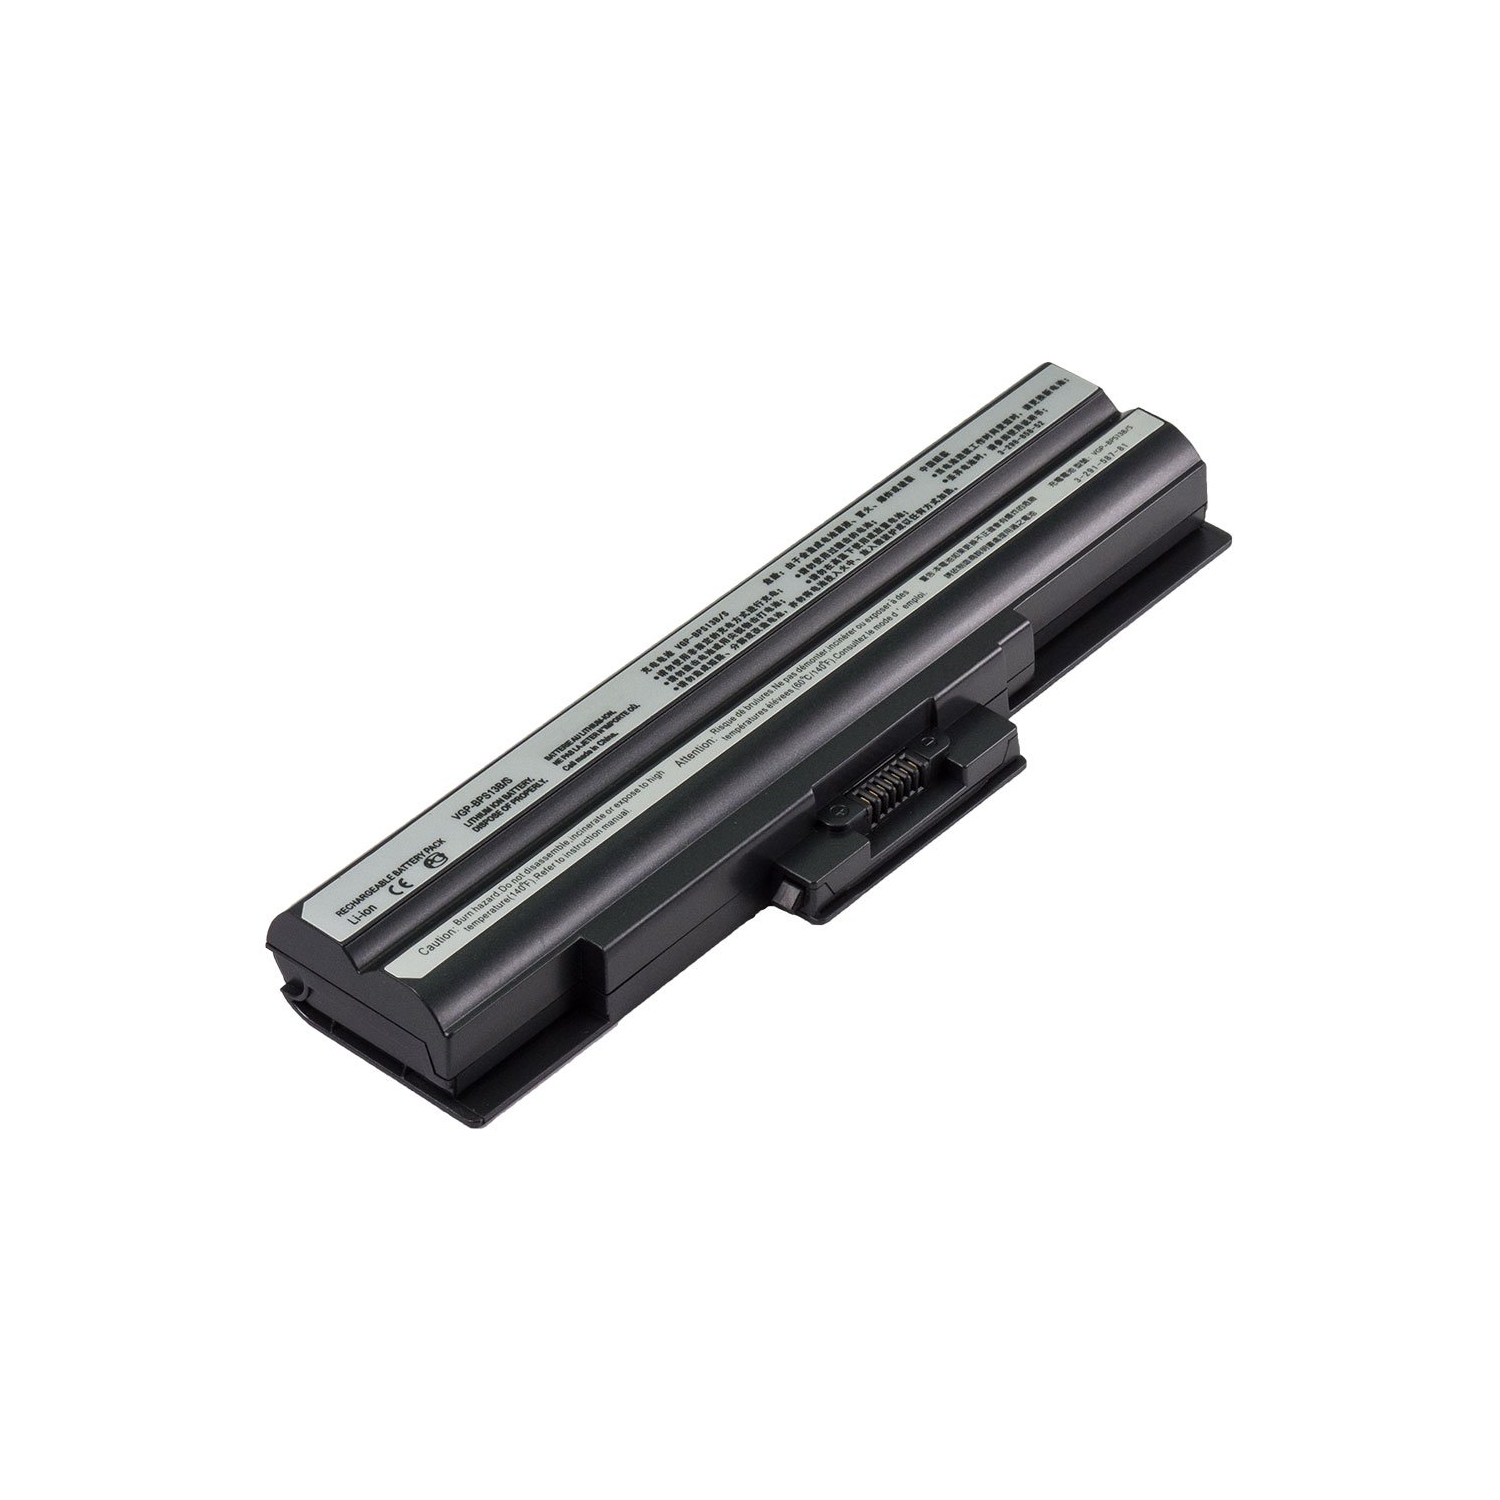 Laptop Battery Replacement for Sony VAIO VGN-CS109E/P, VGP-BPL13, VGP-BPS13/Q, VGP-BPS13A/B, VGP-BPS13A/S, VGP-BPS13A